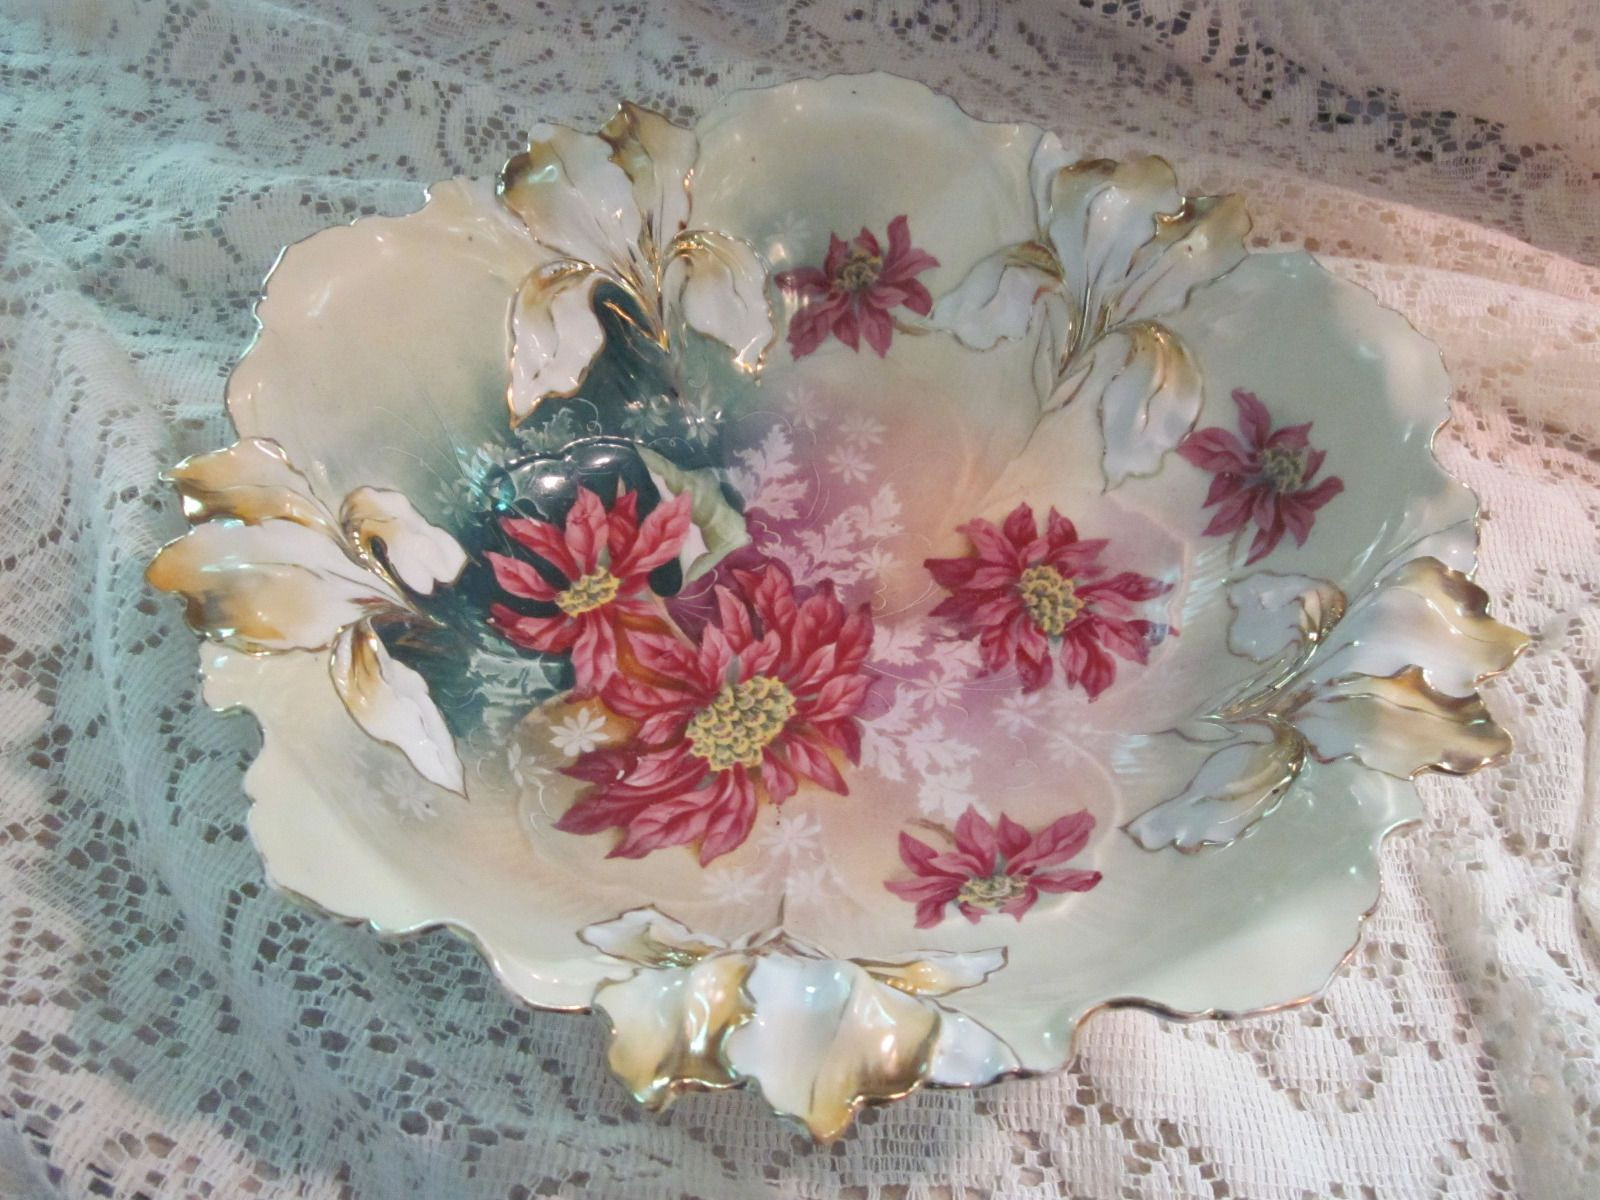 27 Ideal Antique Rose Vase 2024 free download antique rose vase of antique prussia large porcelain iris flower beautiful bowl as is pertaining to antique prussia large porcelain iris flower beautiful bowl as is ebay